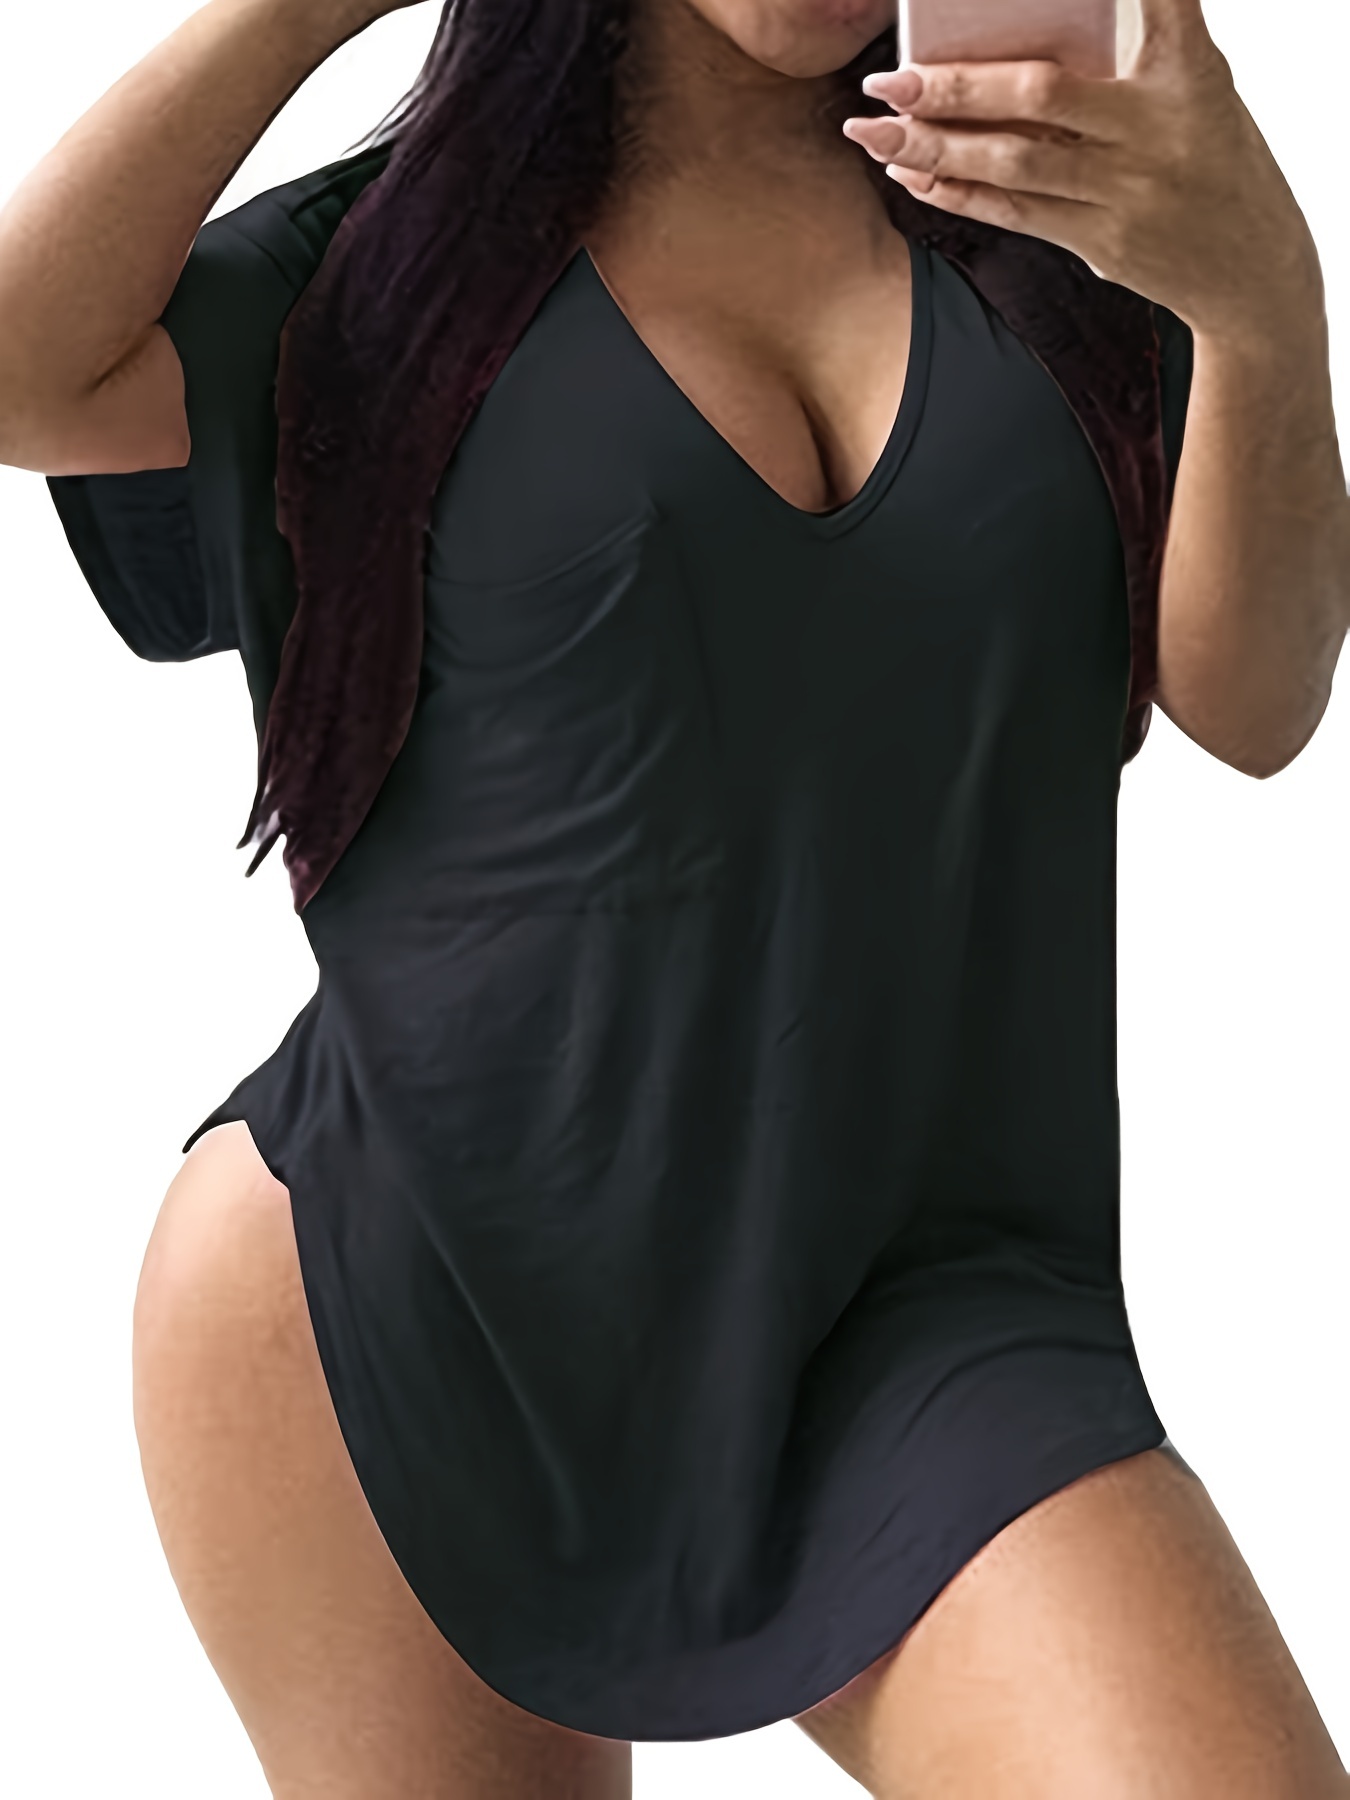 Sexy Plus Size Tops & Shirts For Women